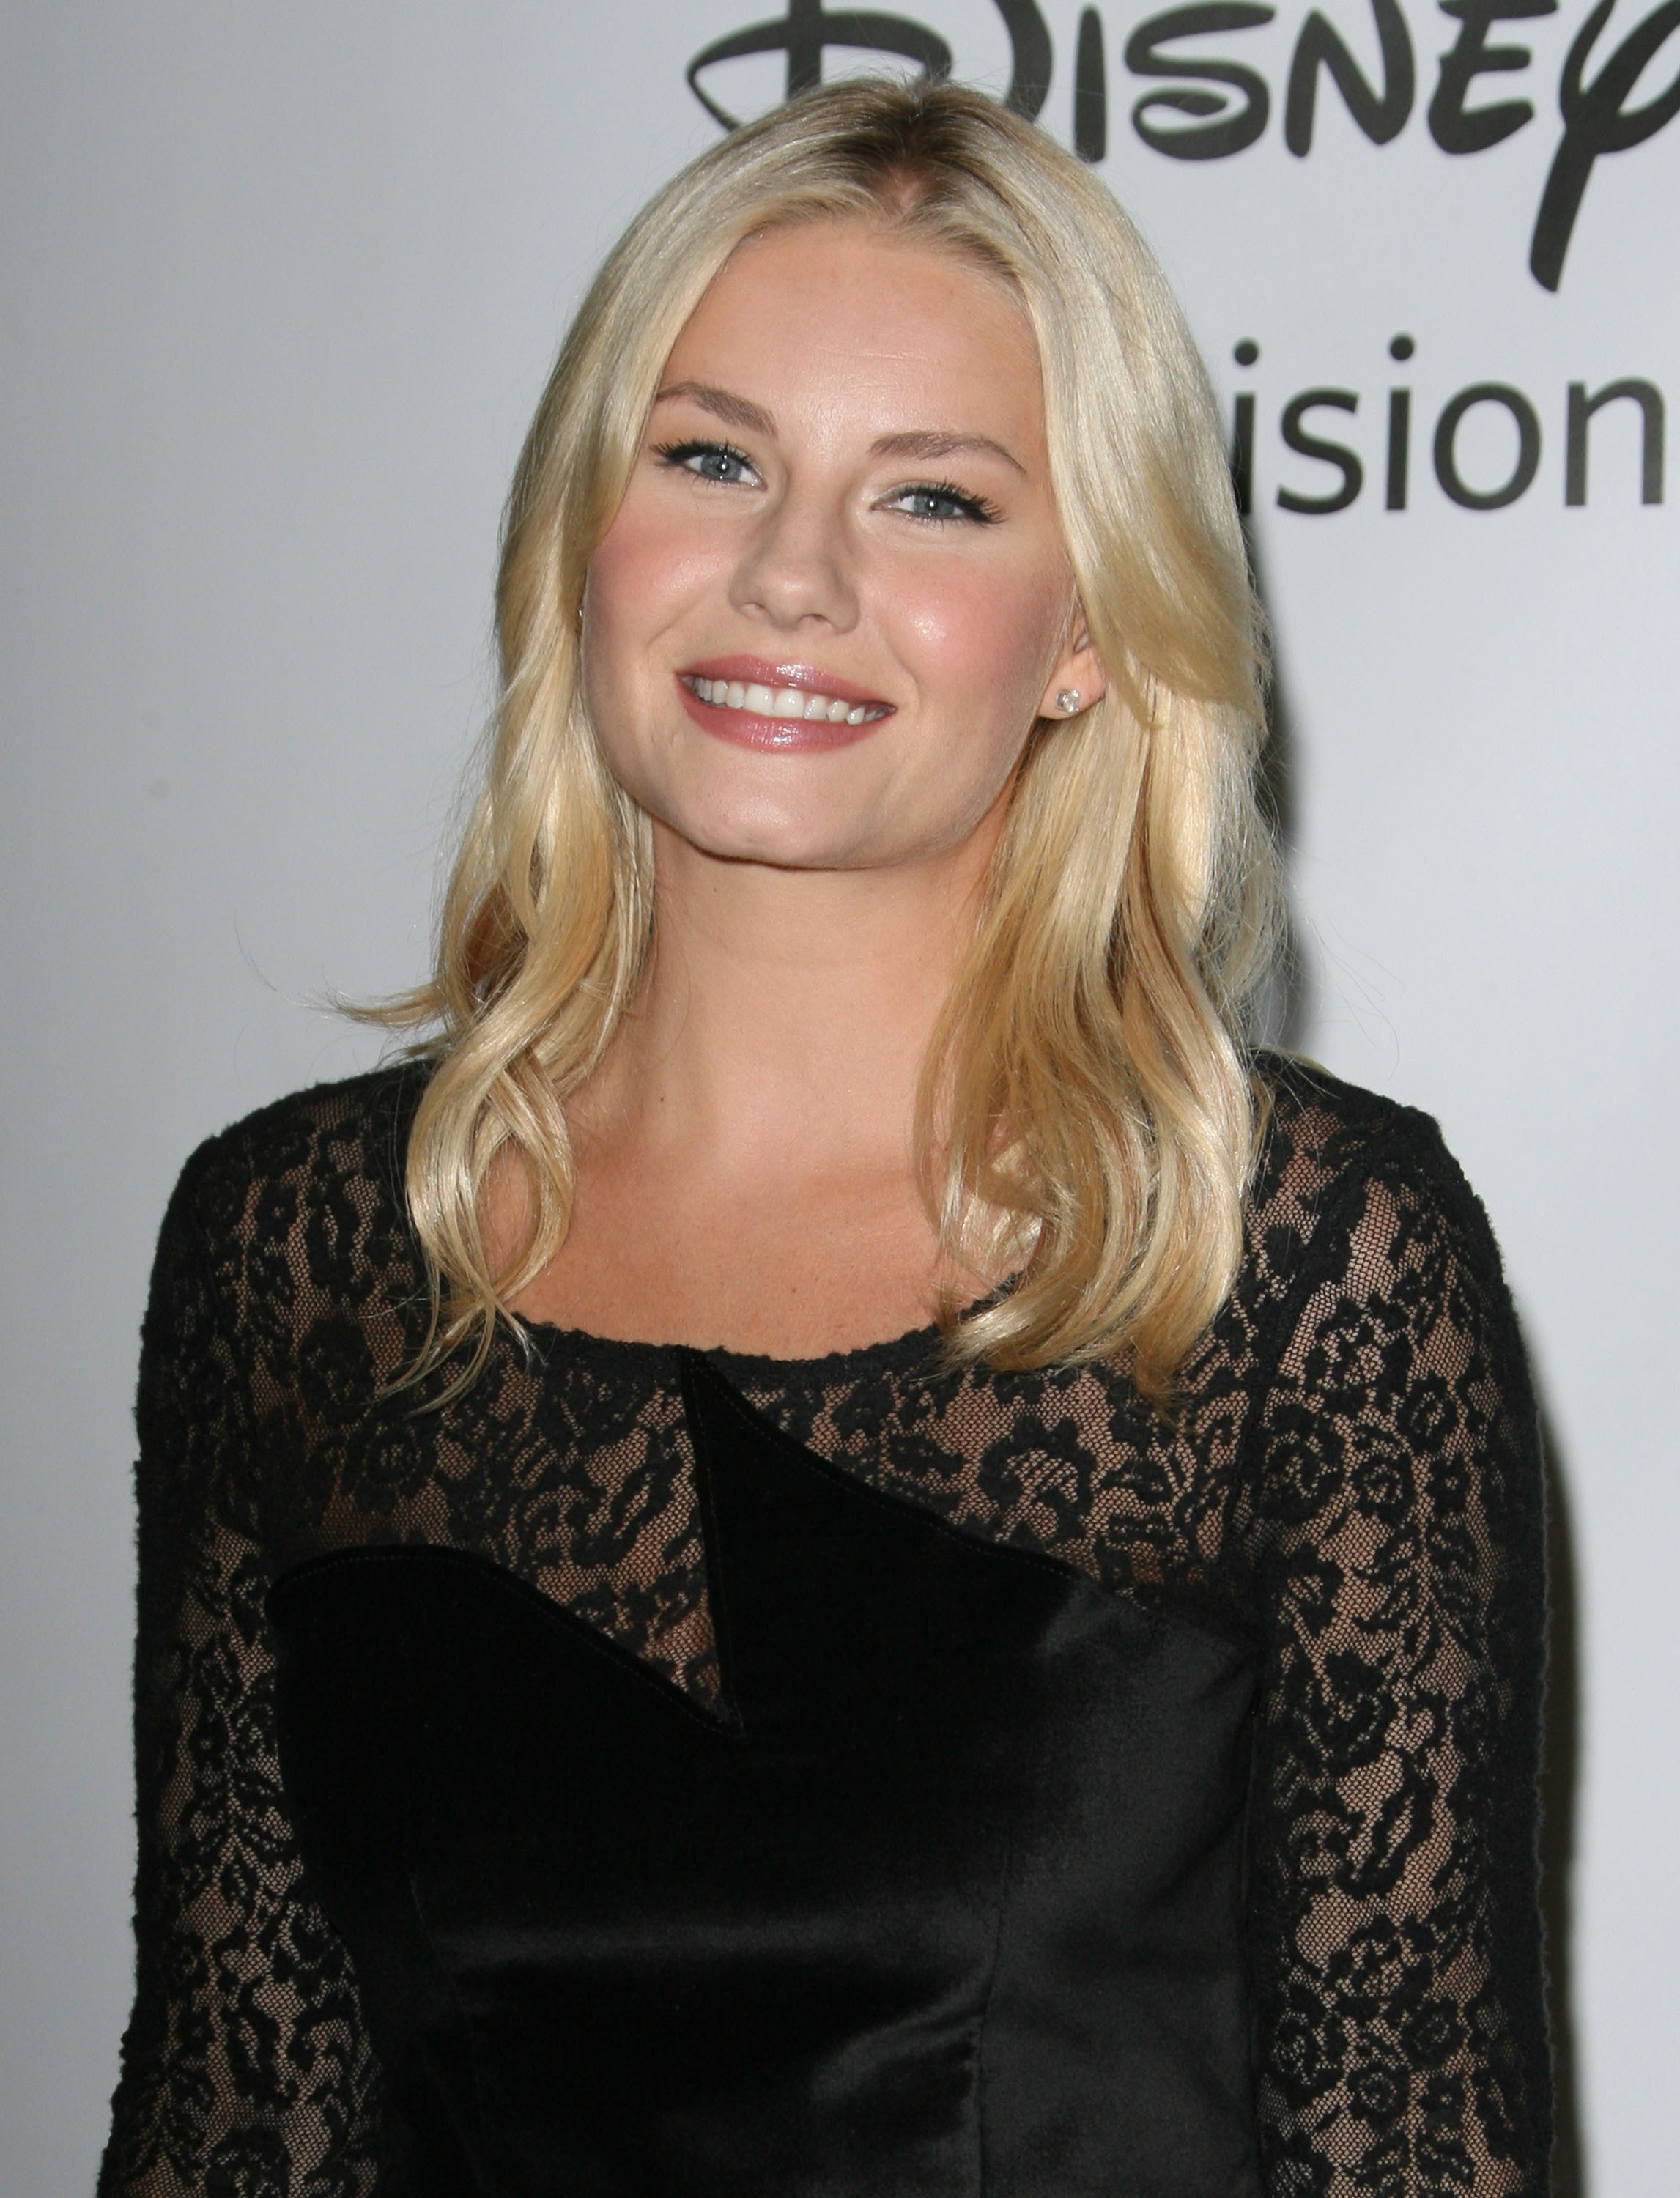  but Elisha Cuthbert is a major hottie according to fans of FHM.